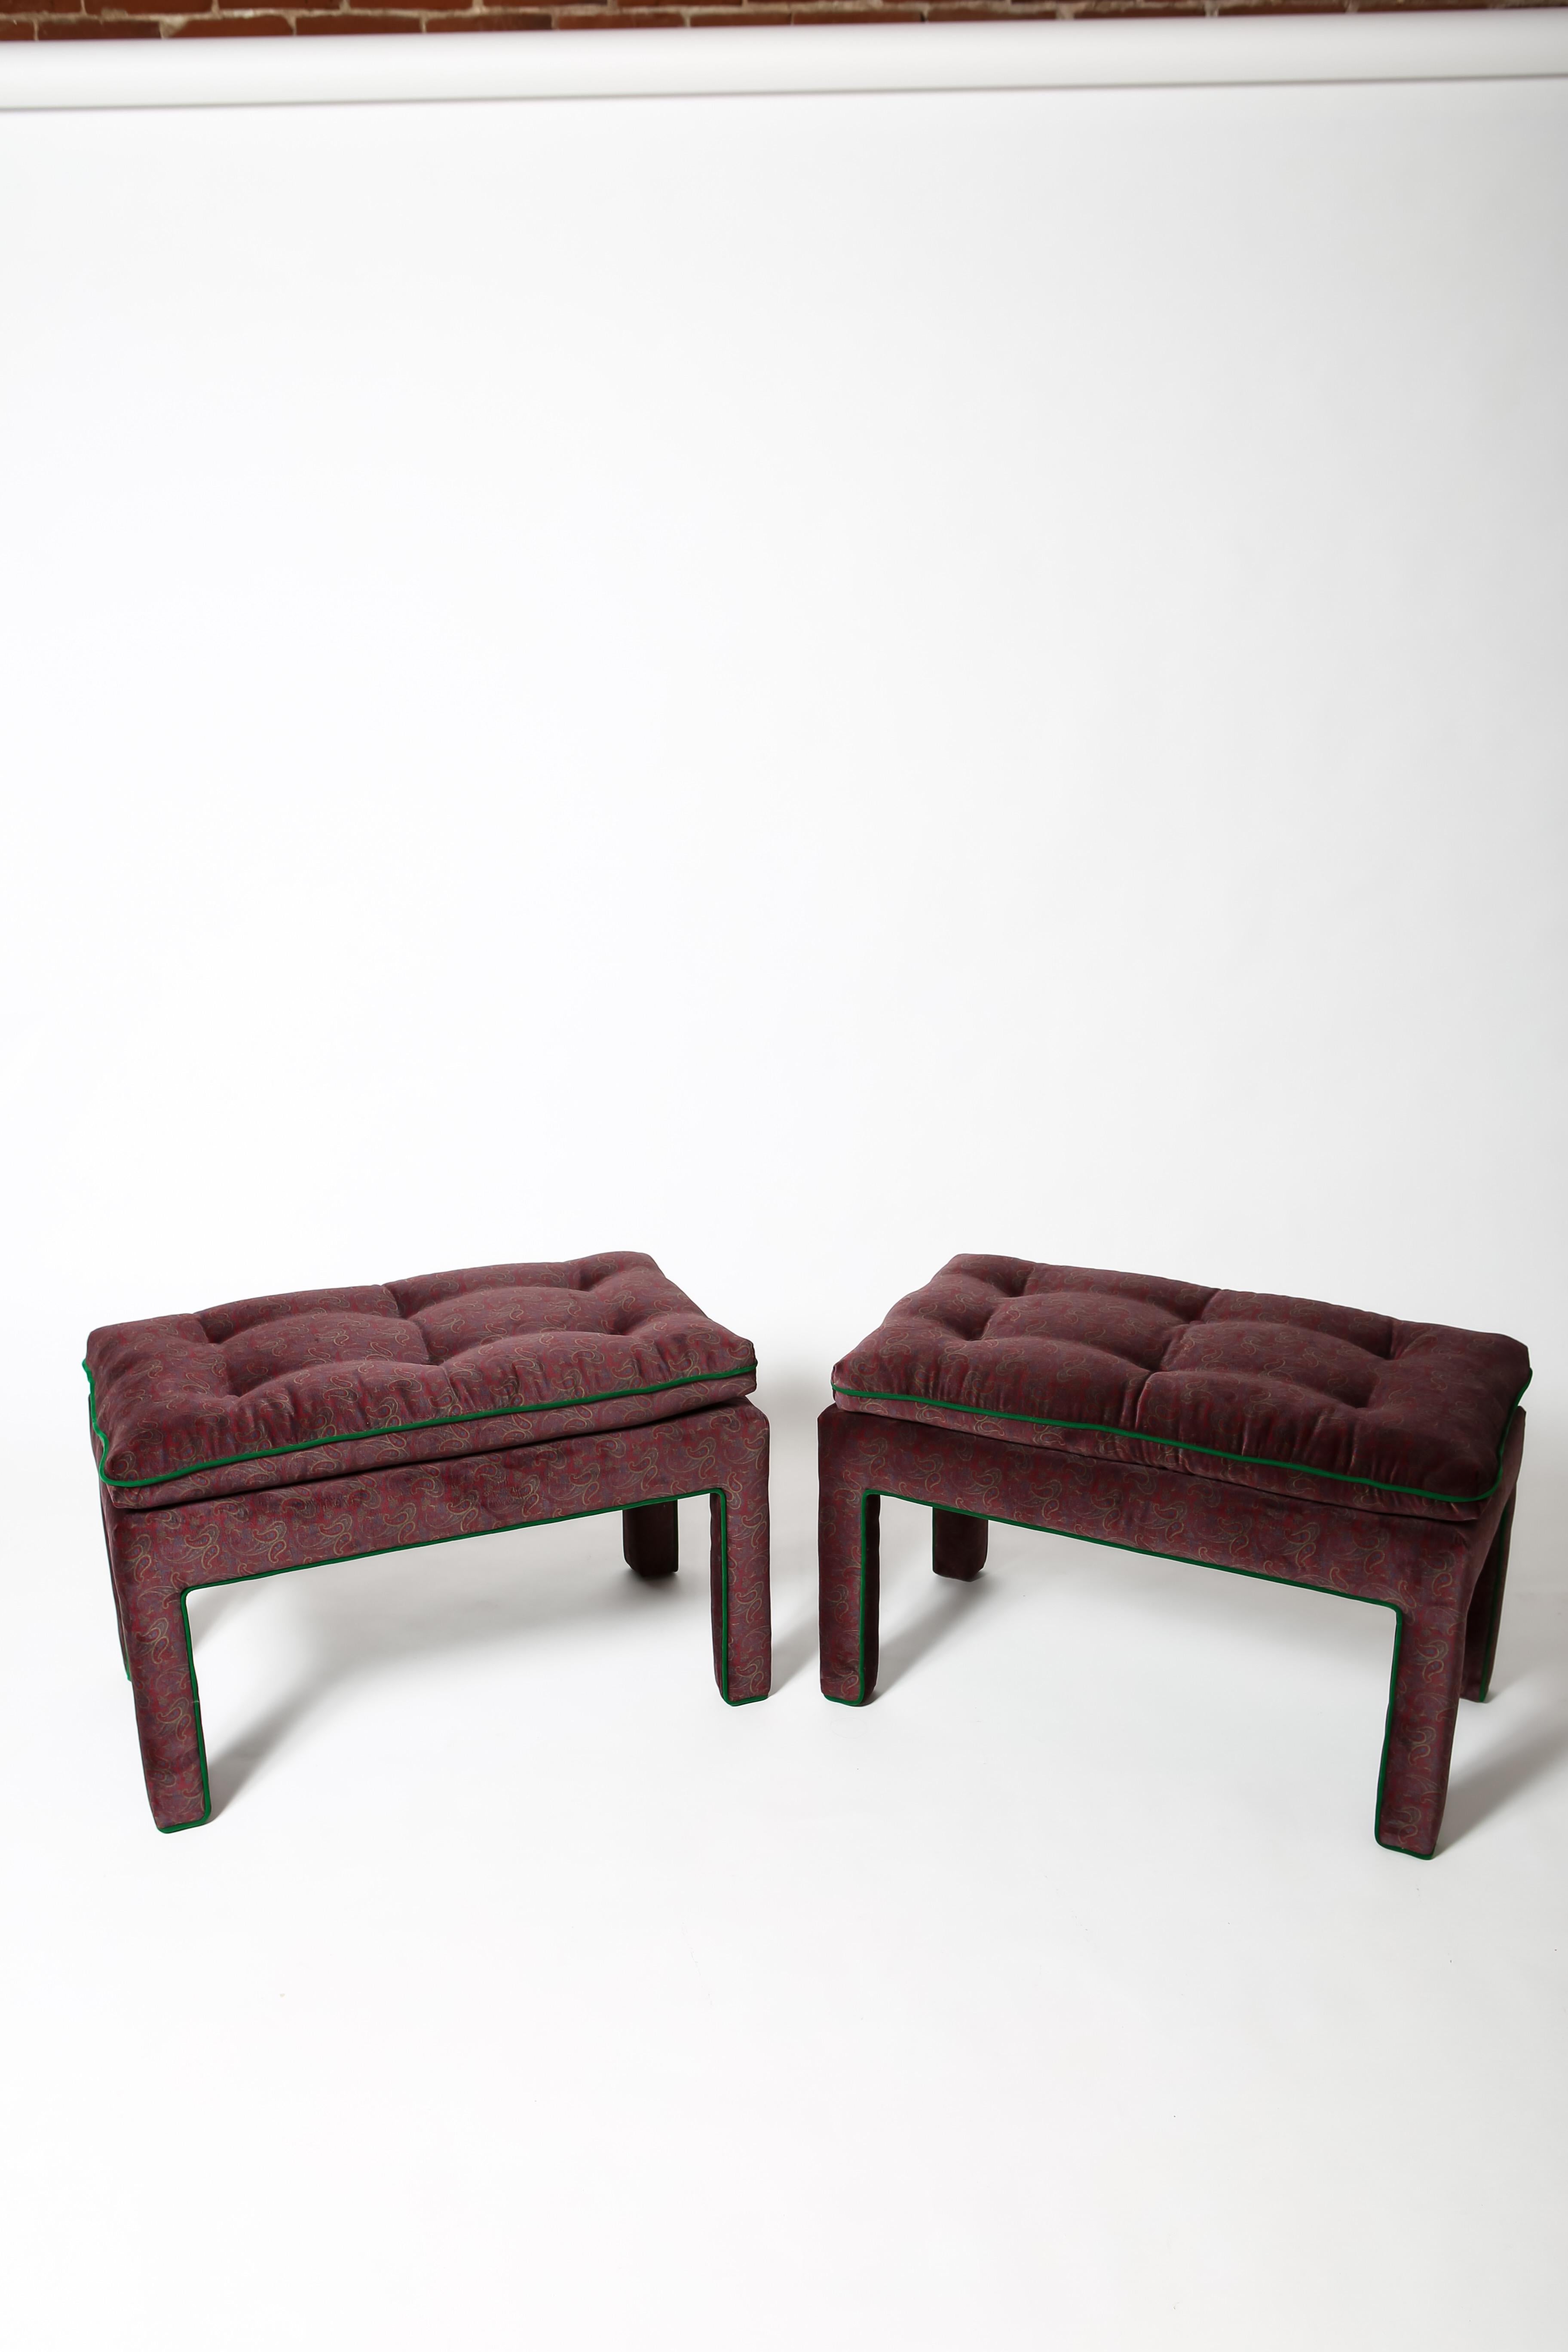 American Paisley Velvet Parsons Benches Fully Upholstered, a Pair